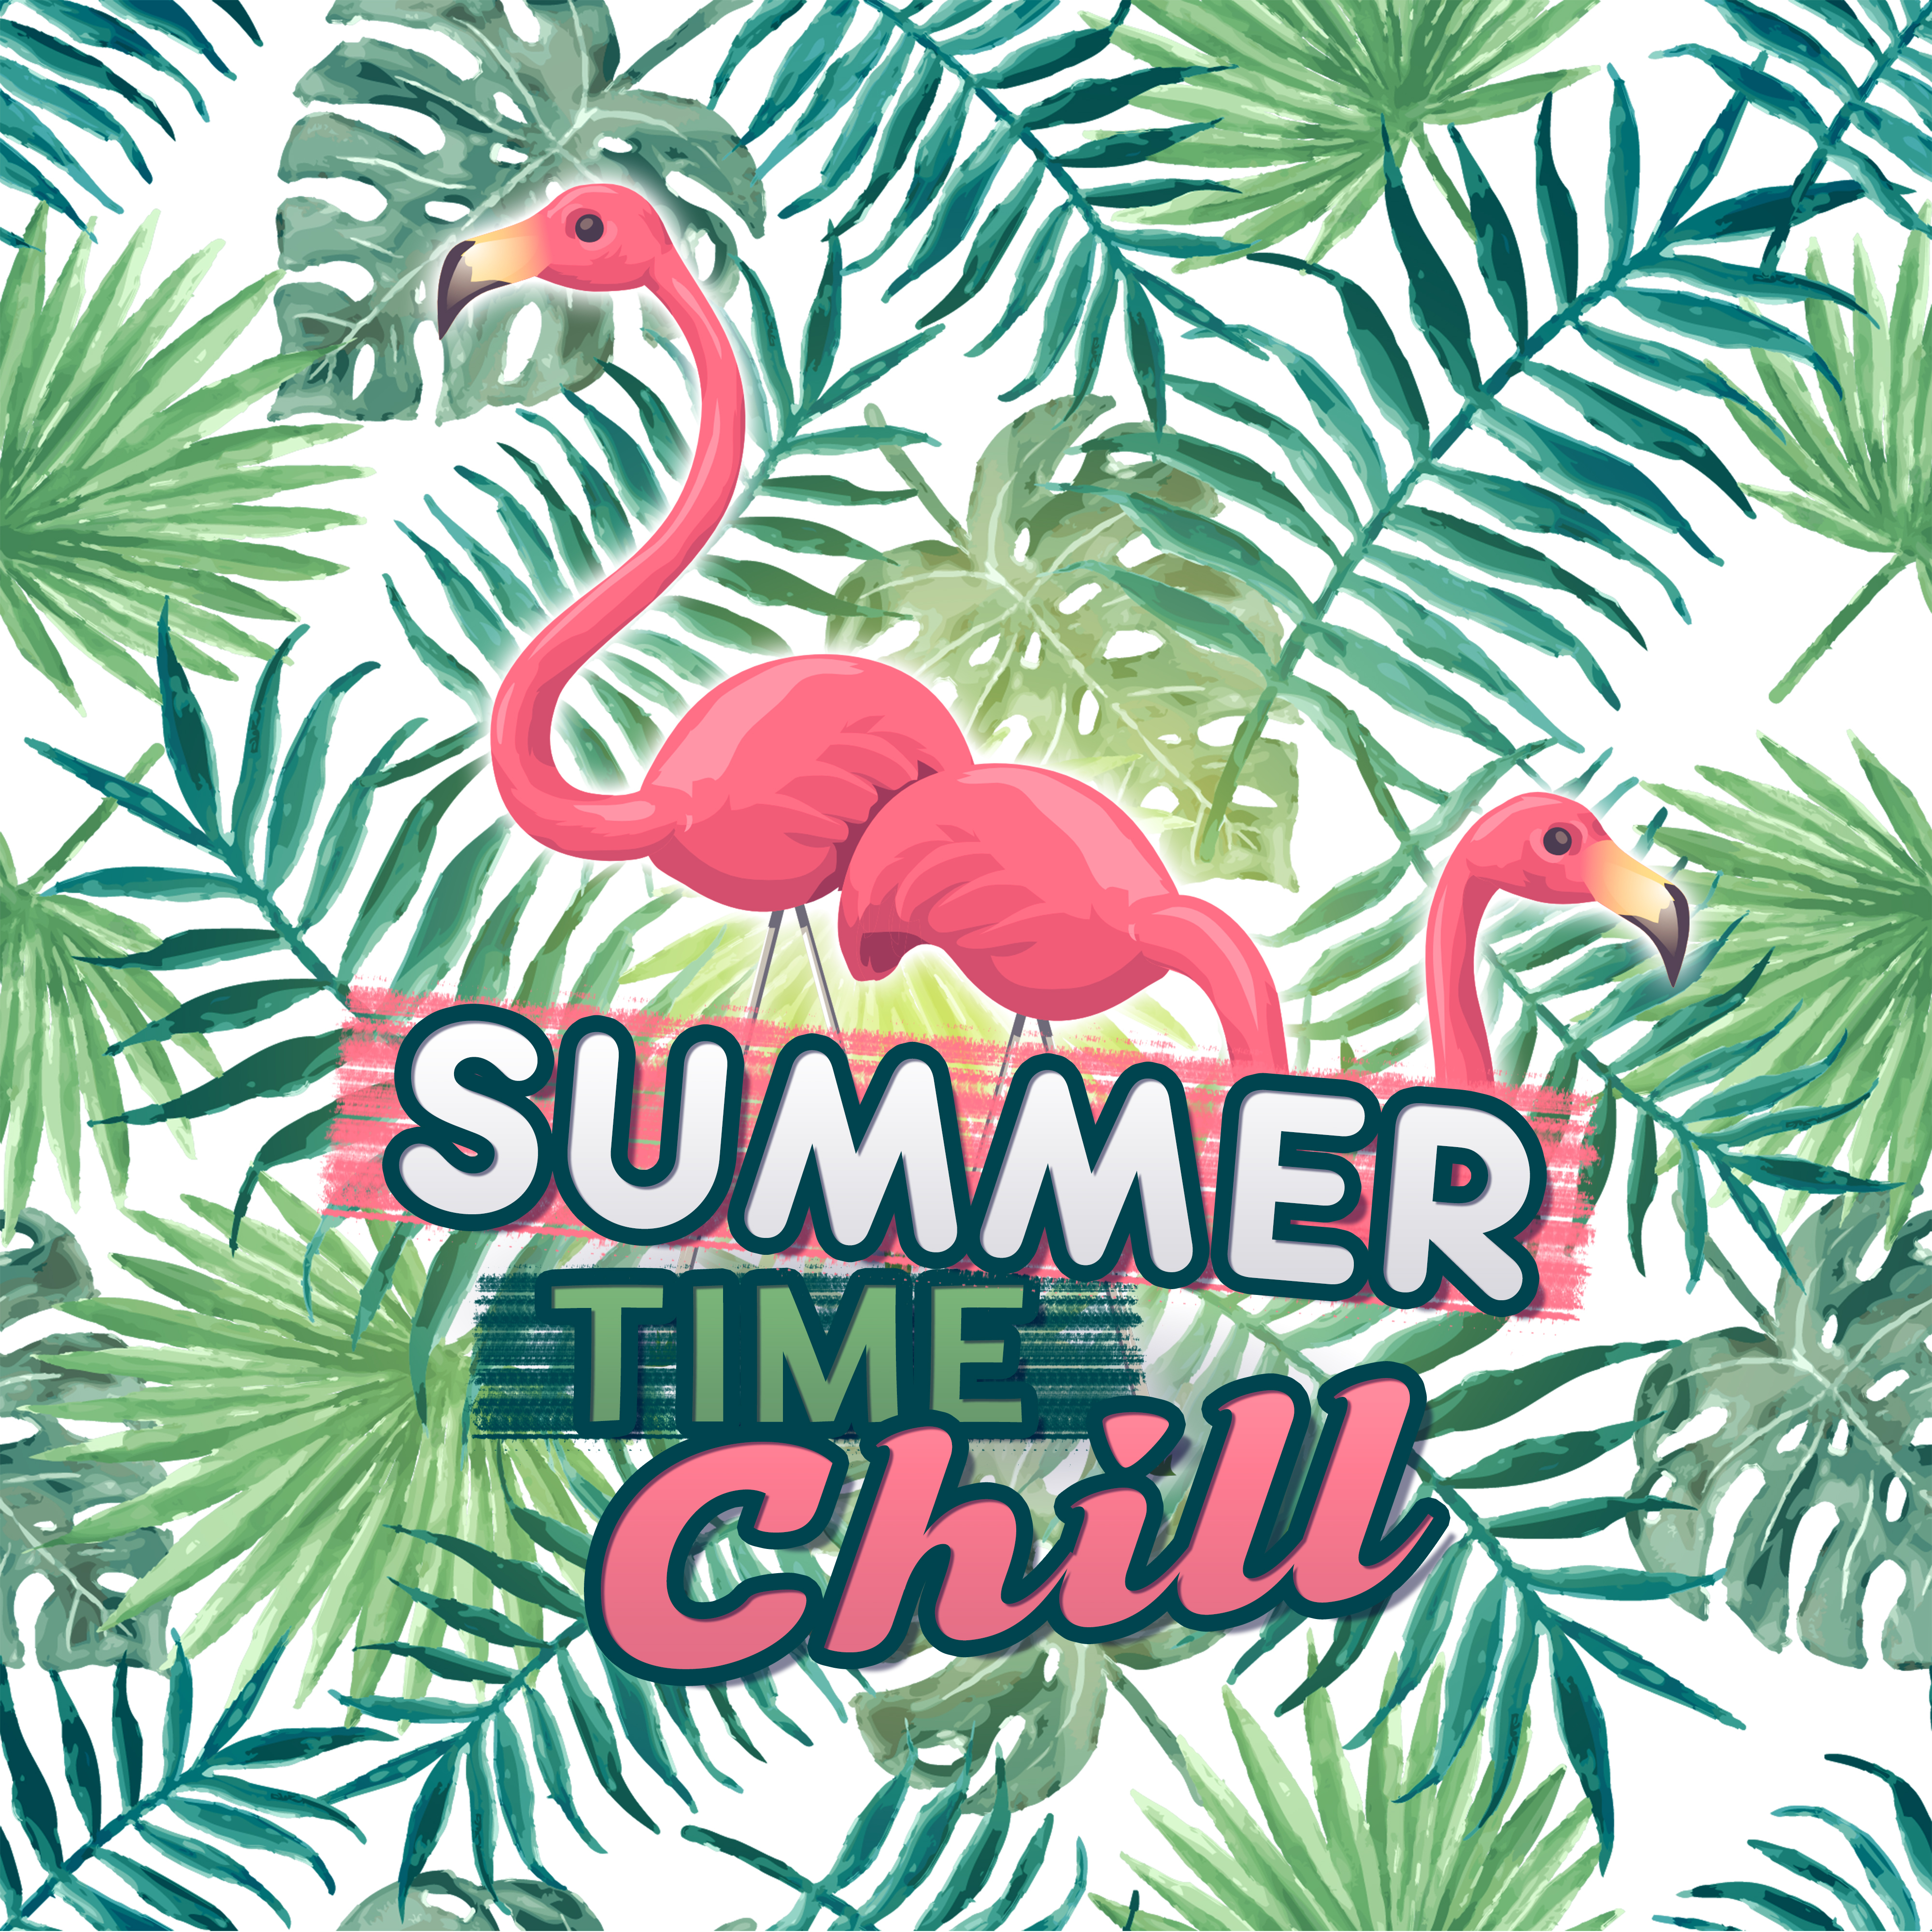 Summer Time Chill  Soft Sounds to Relax, Chill Out 2017, Easy Listening, Peaceful Mind, Holiday Journey